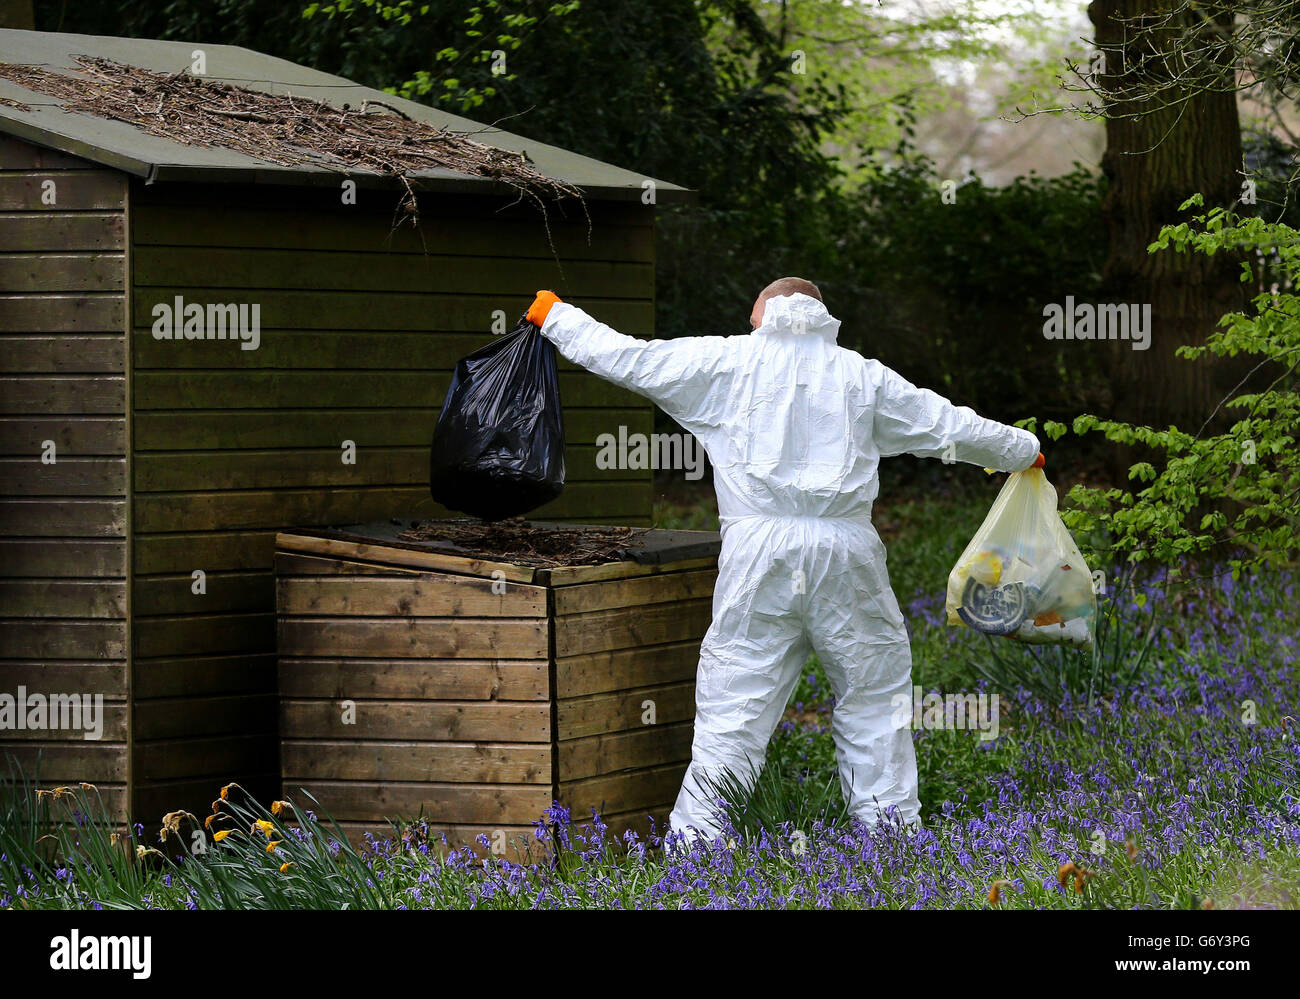 Police investigators search the contents of the bins at the home of Peaches Geldof in Wrotham, Kent, after the 25-year-old was found dead at home yesterday afternoon. Stock Photo